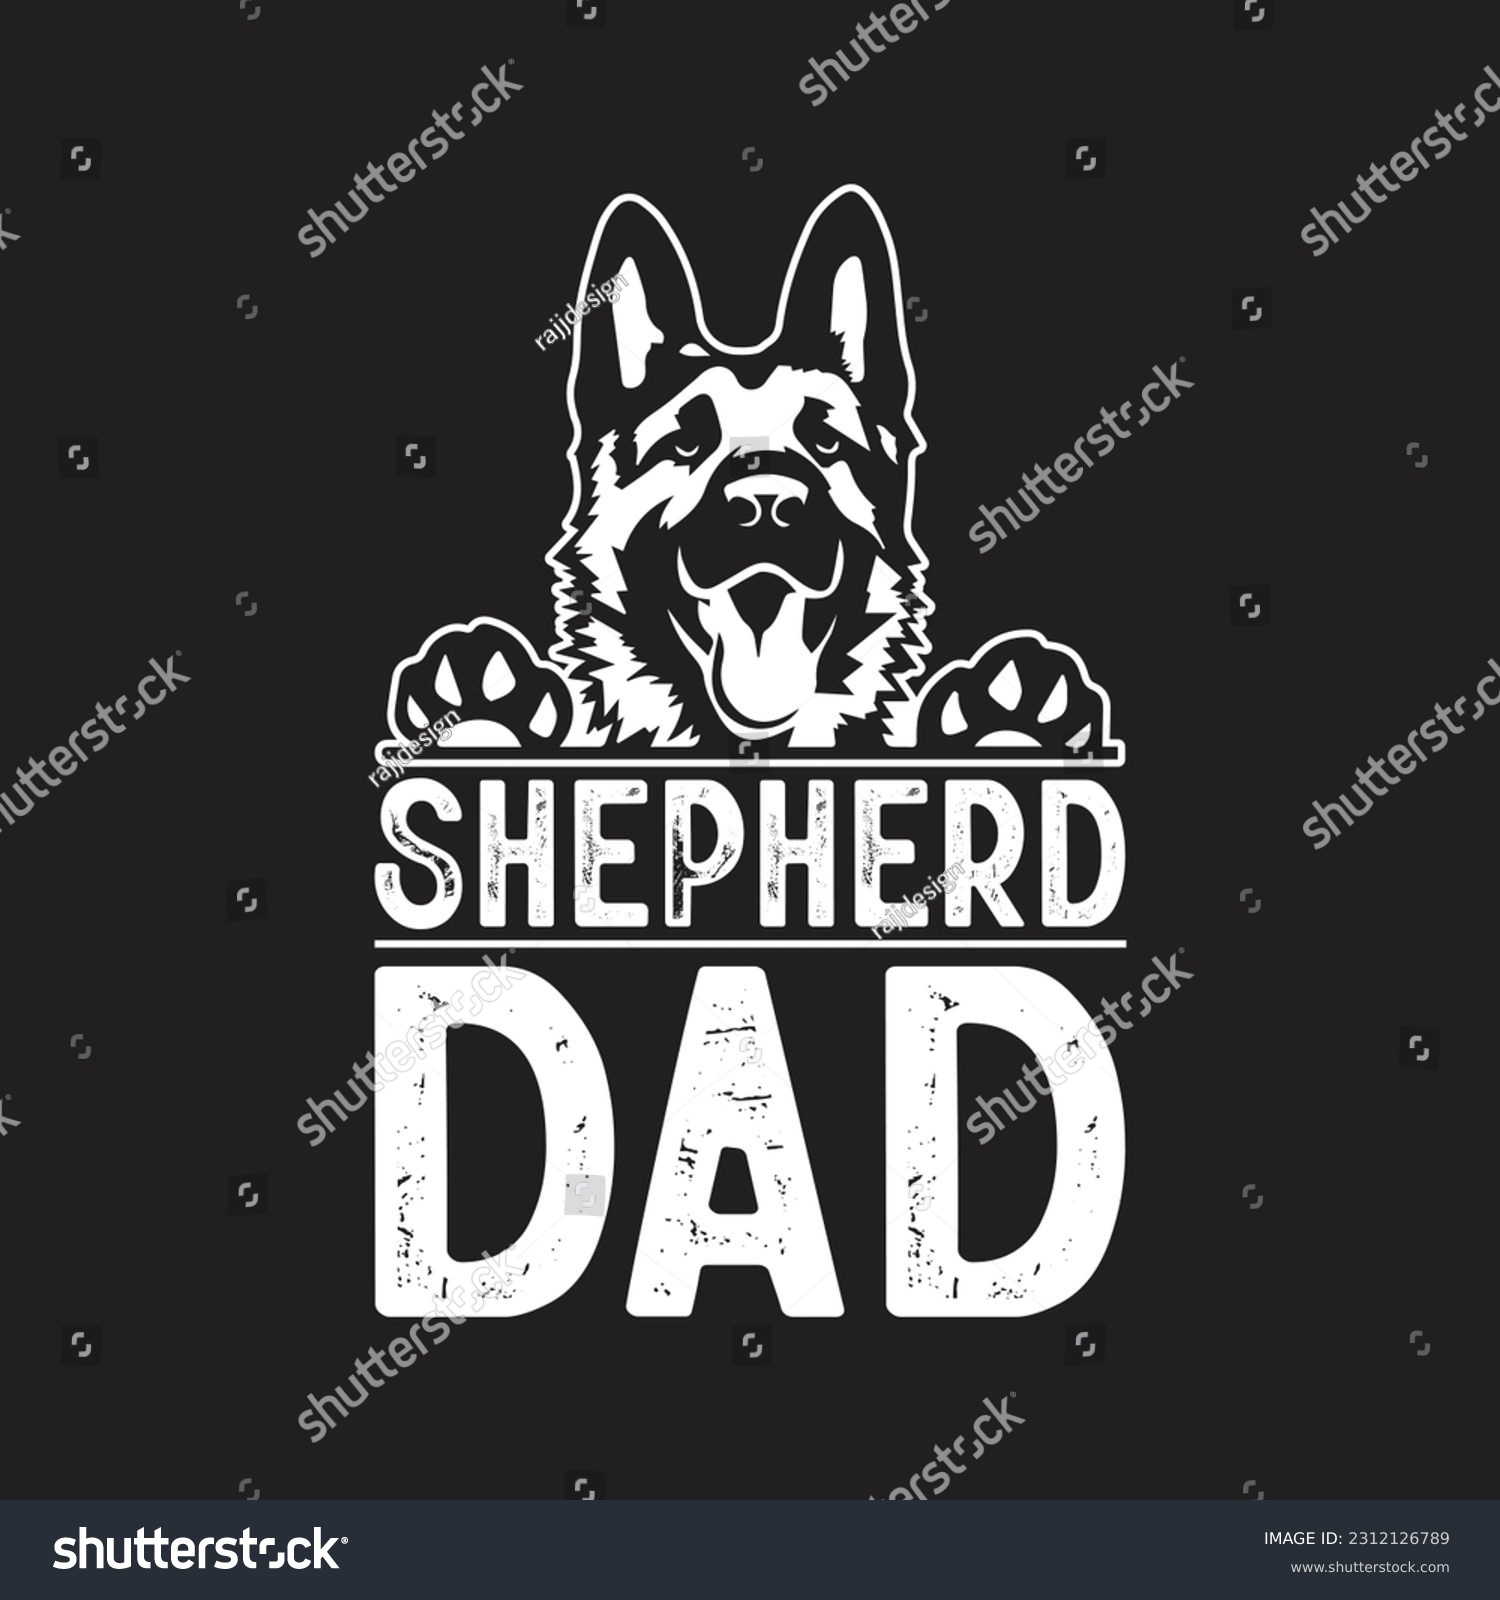 SVG of German Shepherd Dad T-Shirt Design, Posters, Greeting Cards, Textiles, and Sticker Vector Illustration svg